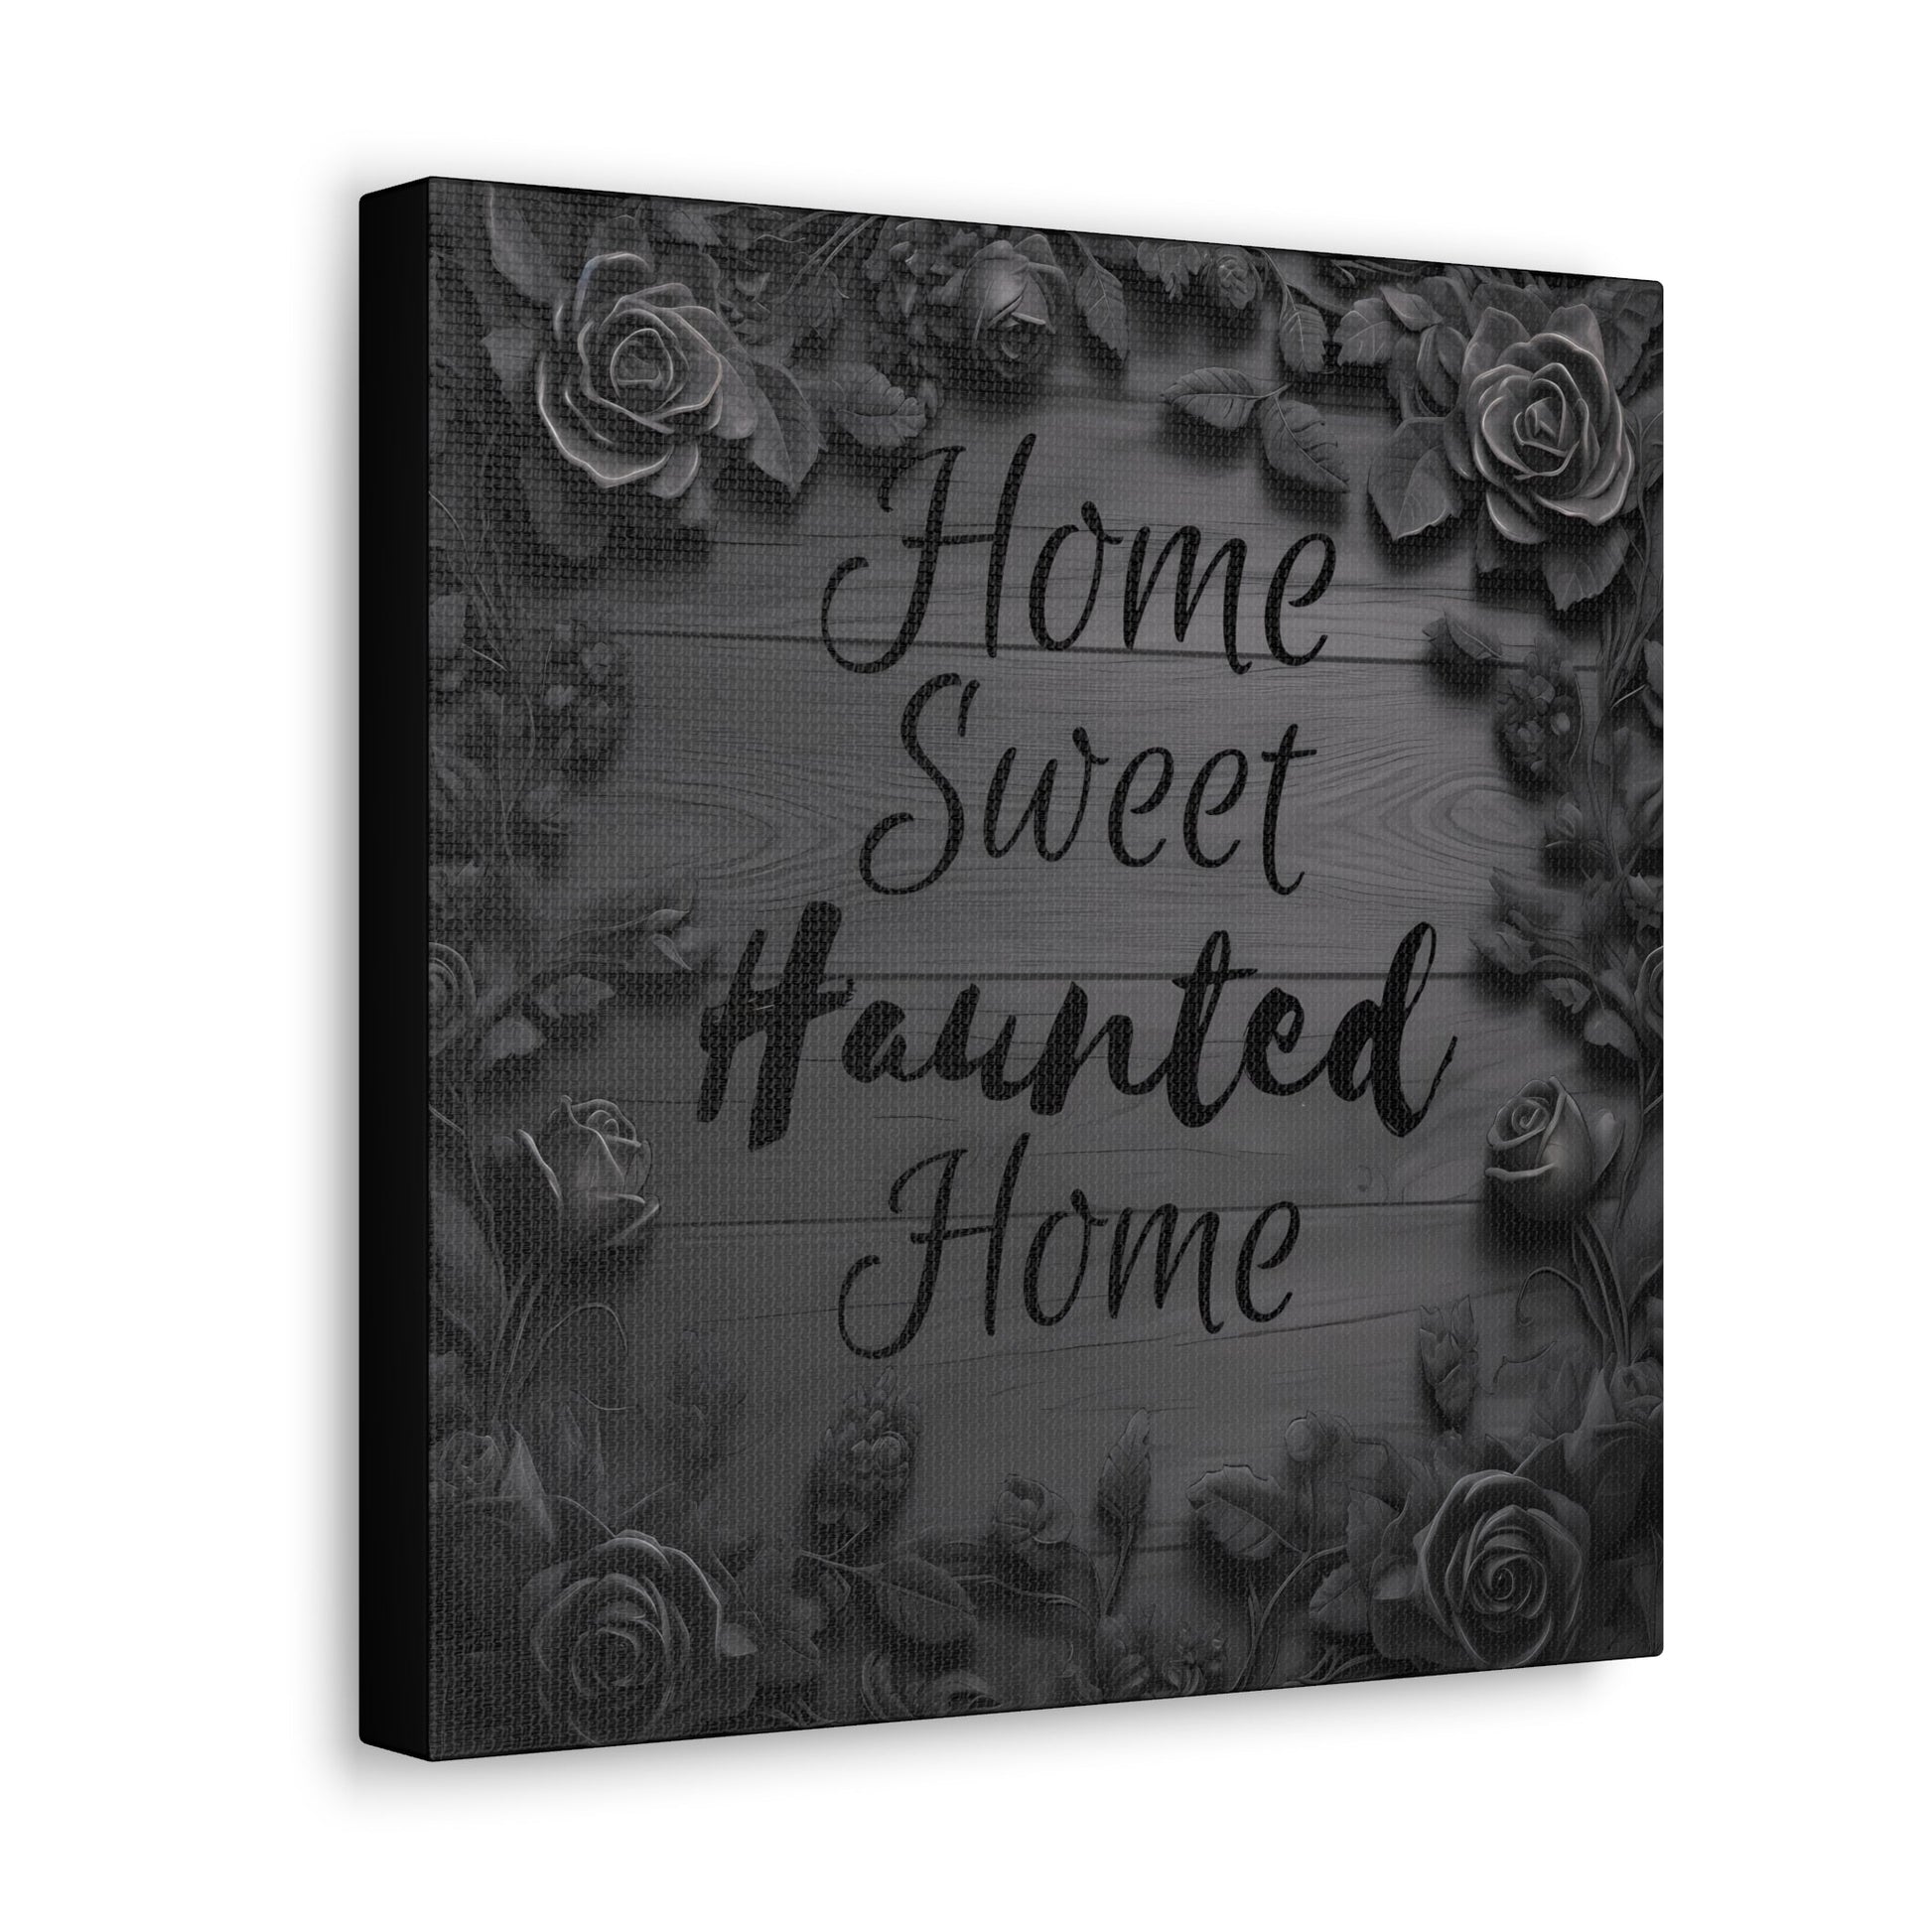 Home Sweet Haunted Home Black Gray Roses Canvas Gallery WrapCanvasVTZdesigns12″ x 12″1.25"Art & Wall DecorCanvasdead roses